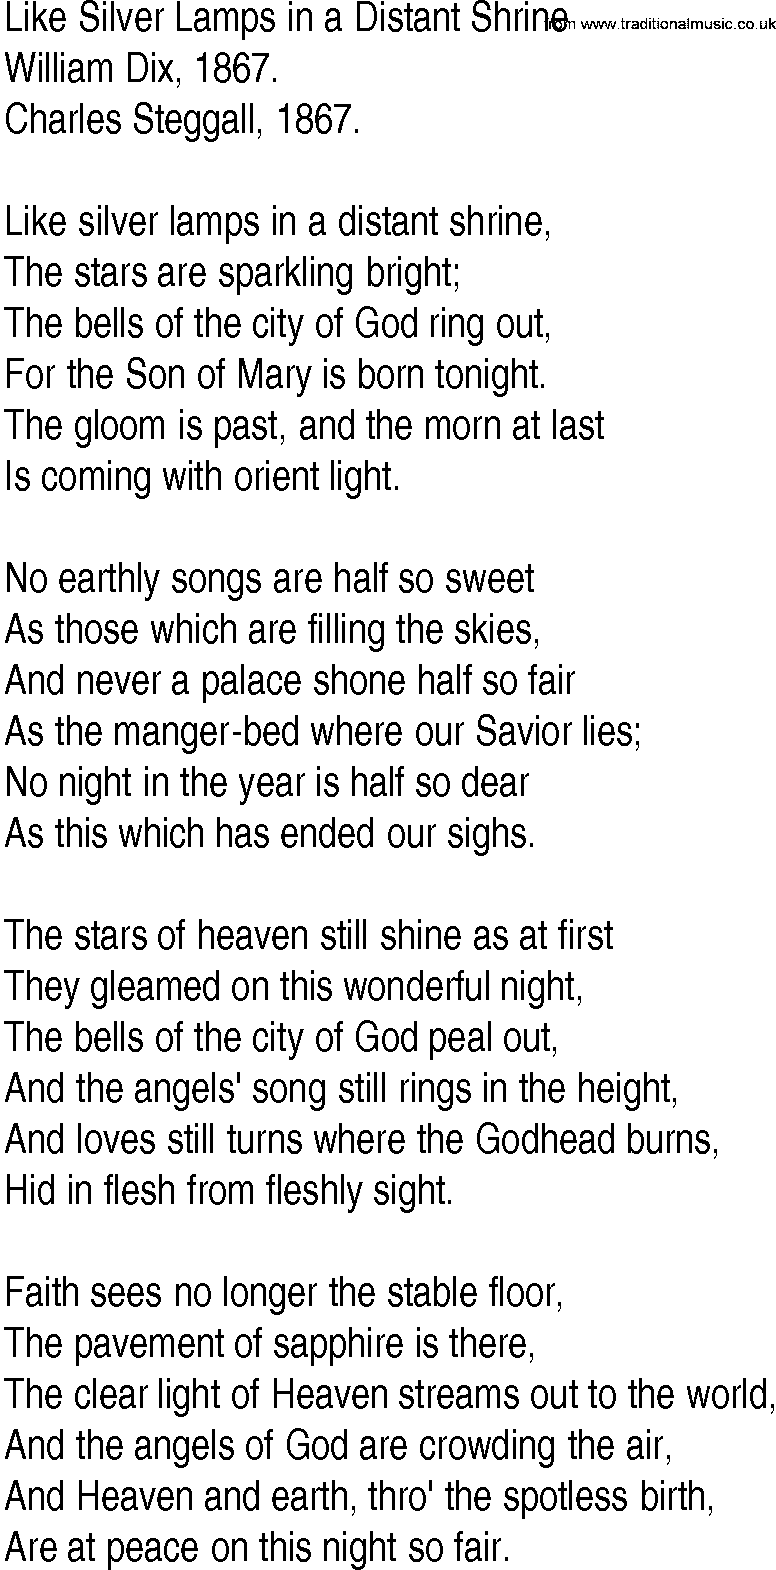 Hymn and Gospel Song: Like Silver Lamps in a Distant Shrine by William Dix lyrics